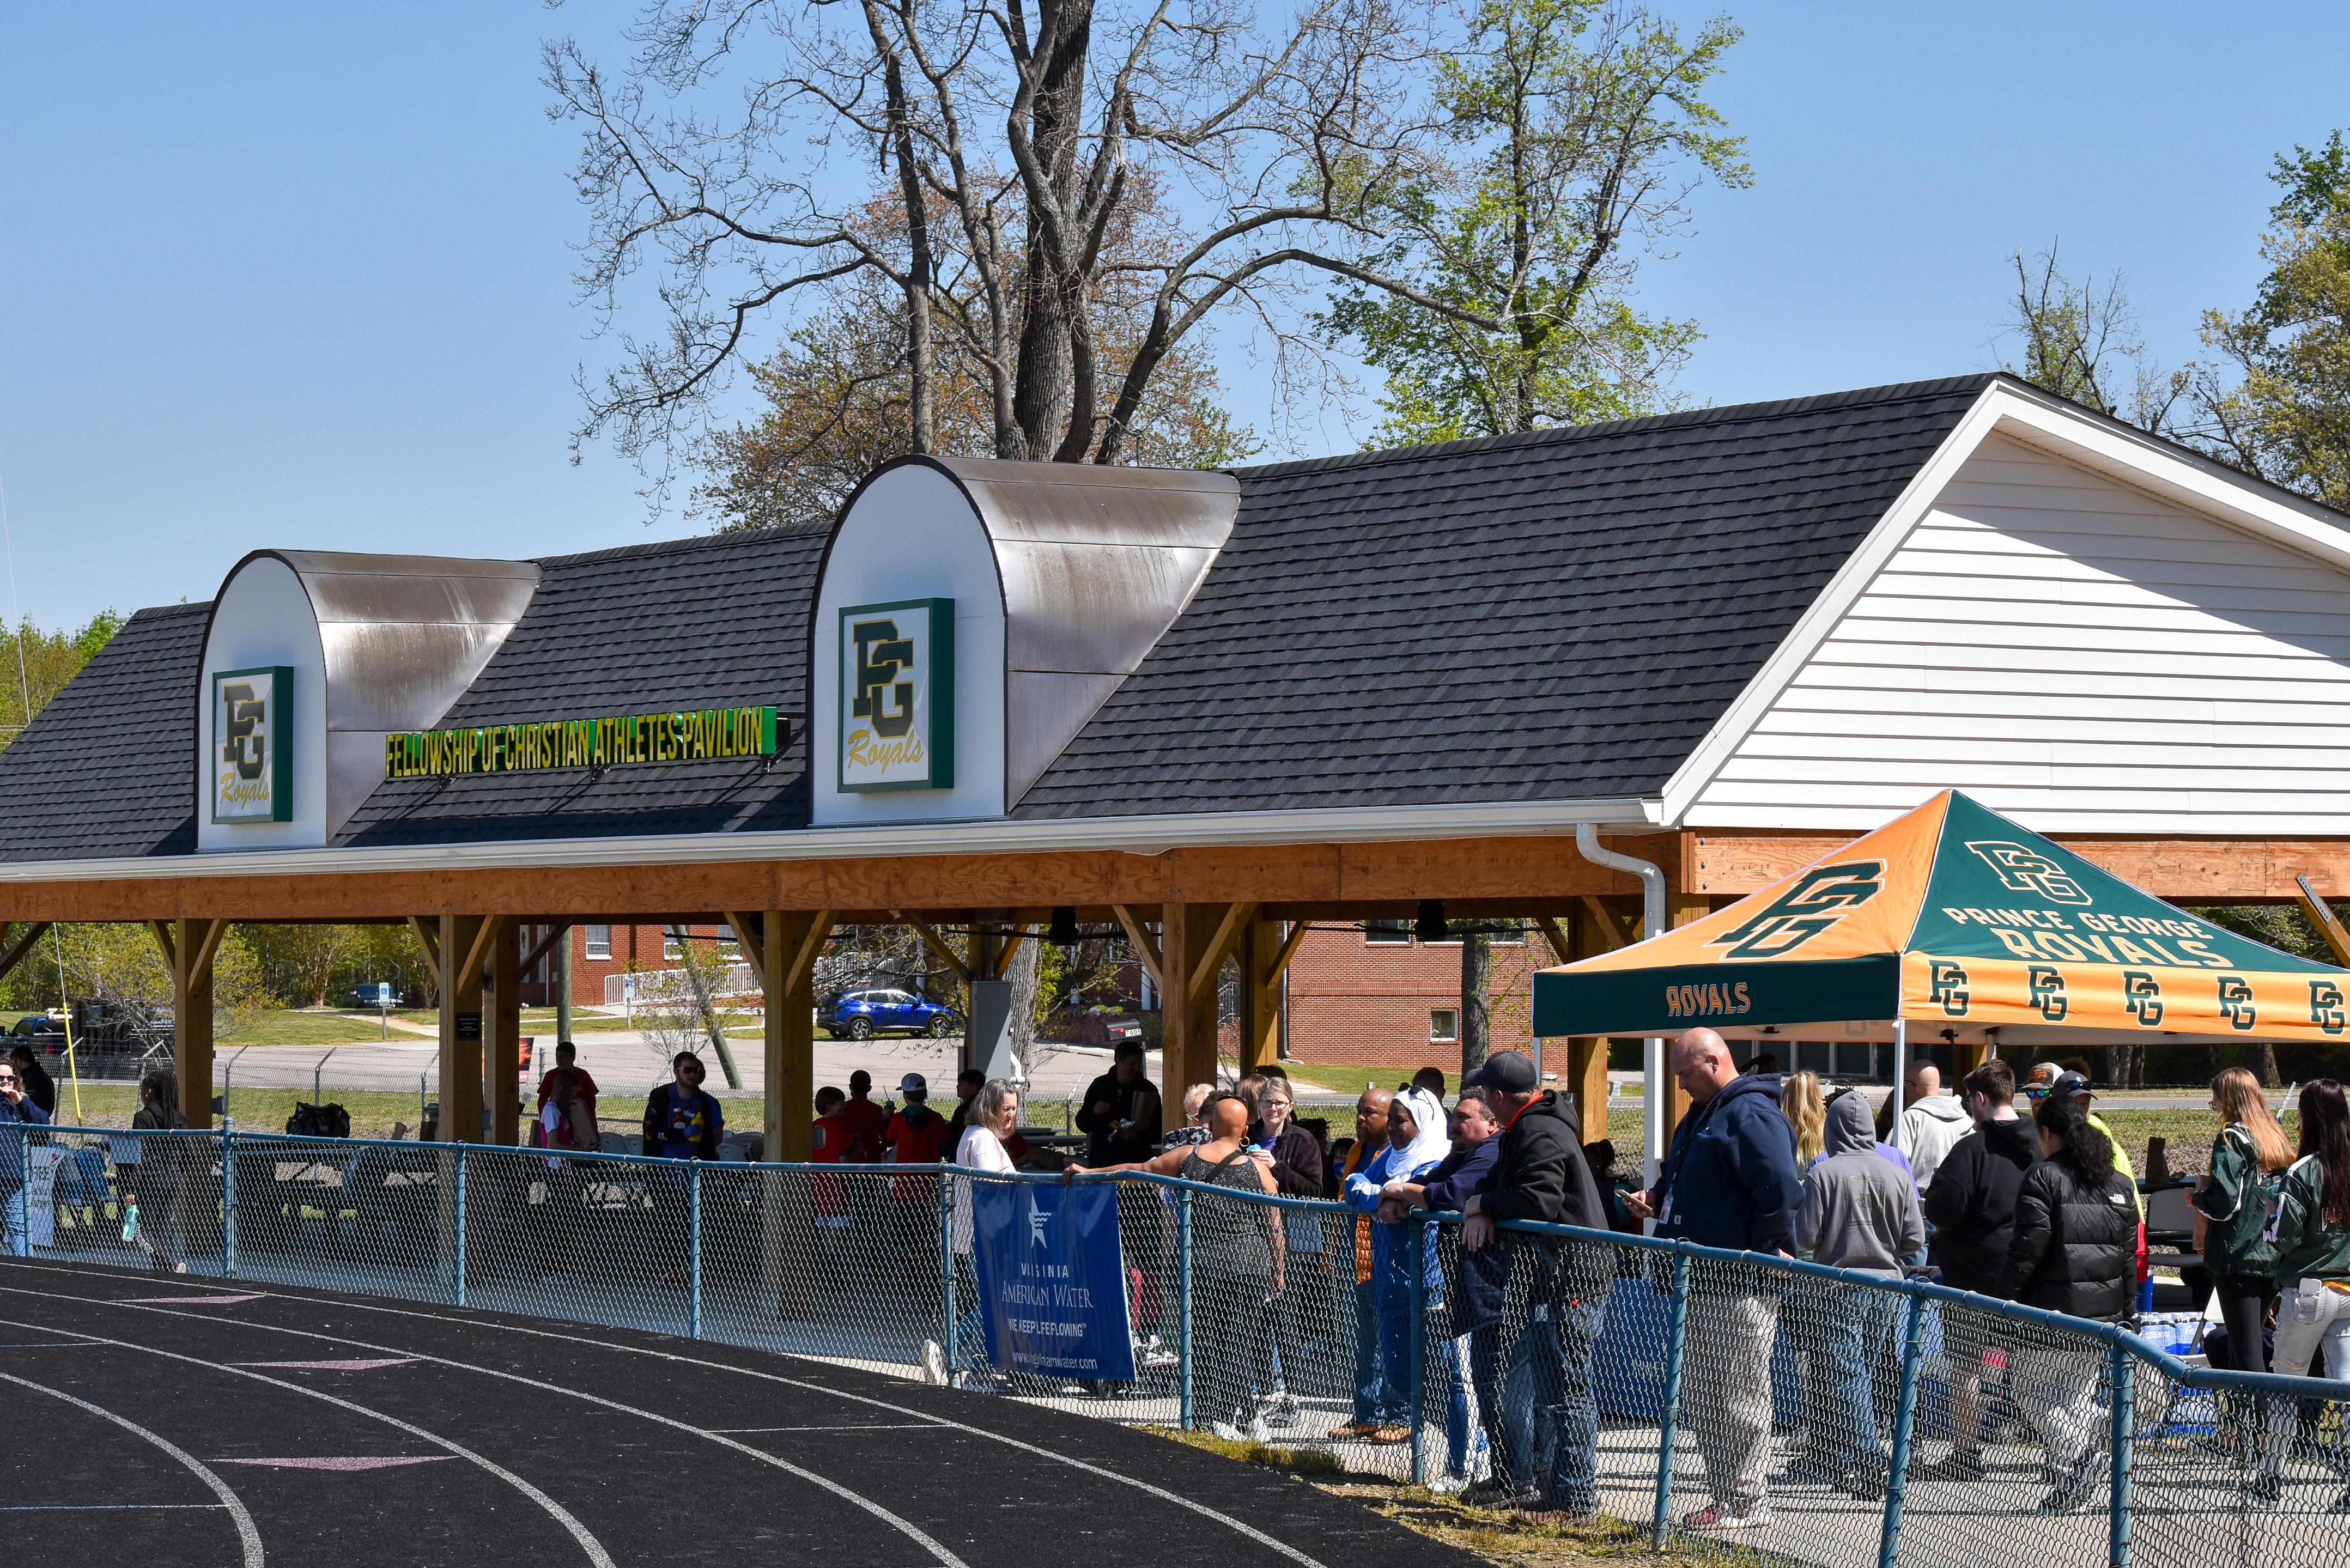 Scenes from the 2022 Feet Meet at Prince George High School Athletic Field